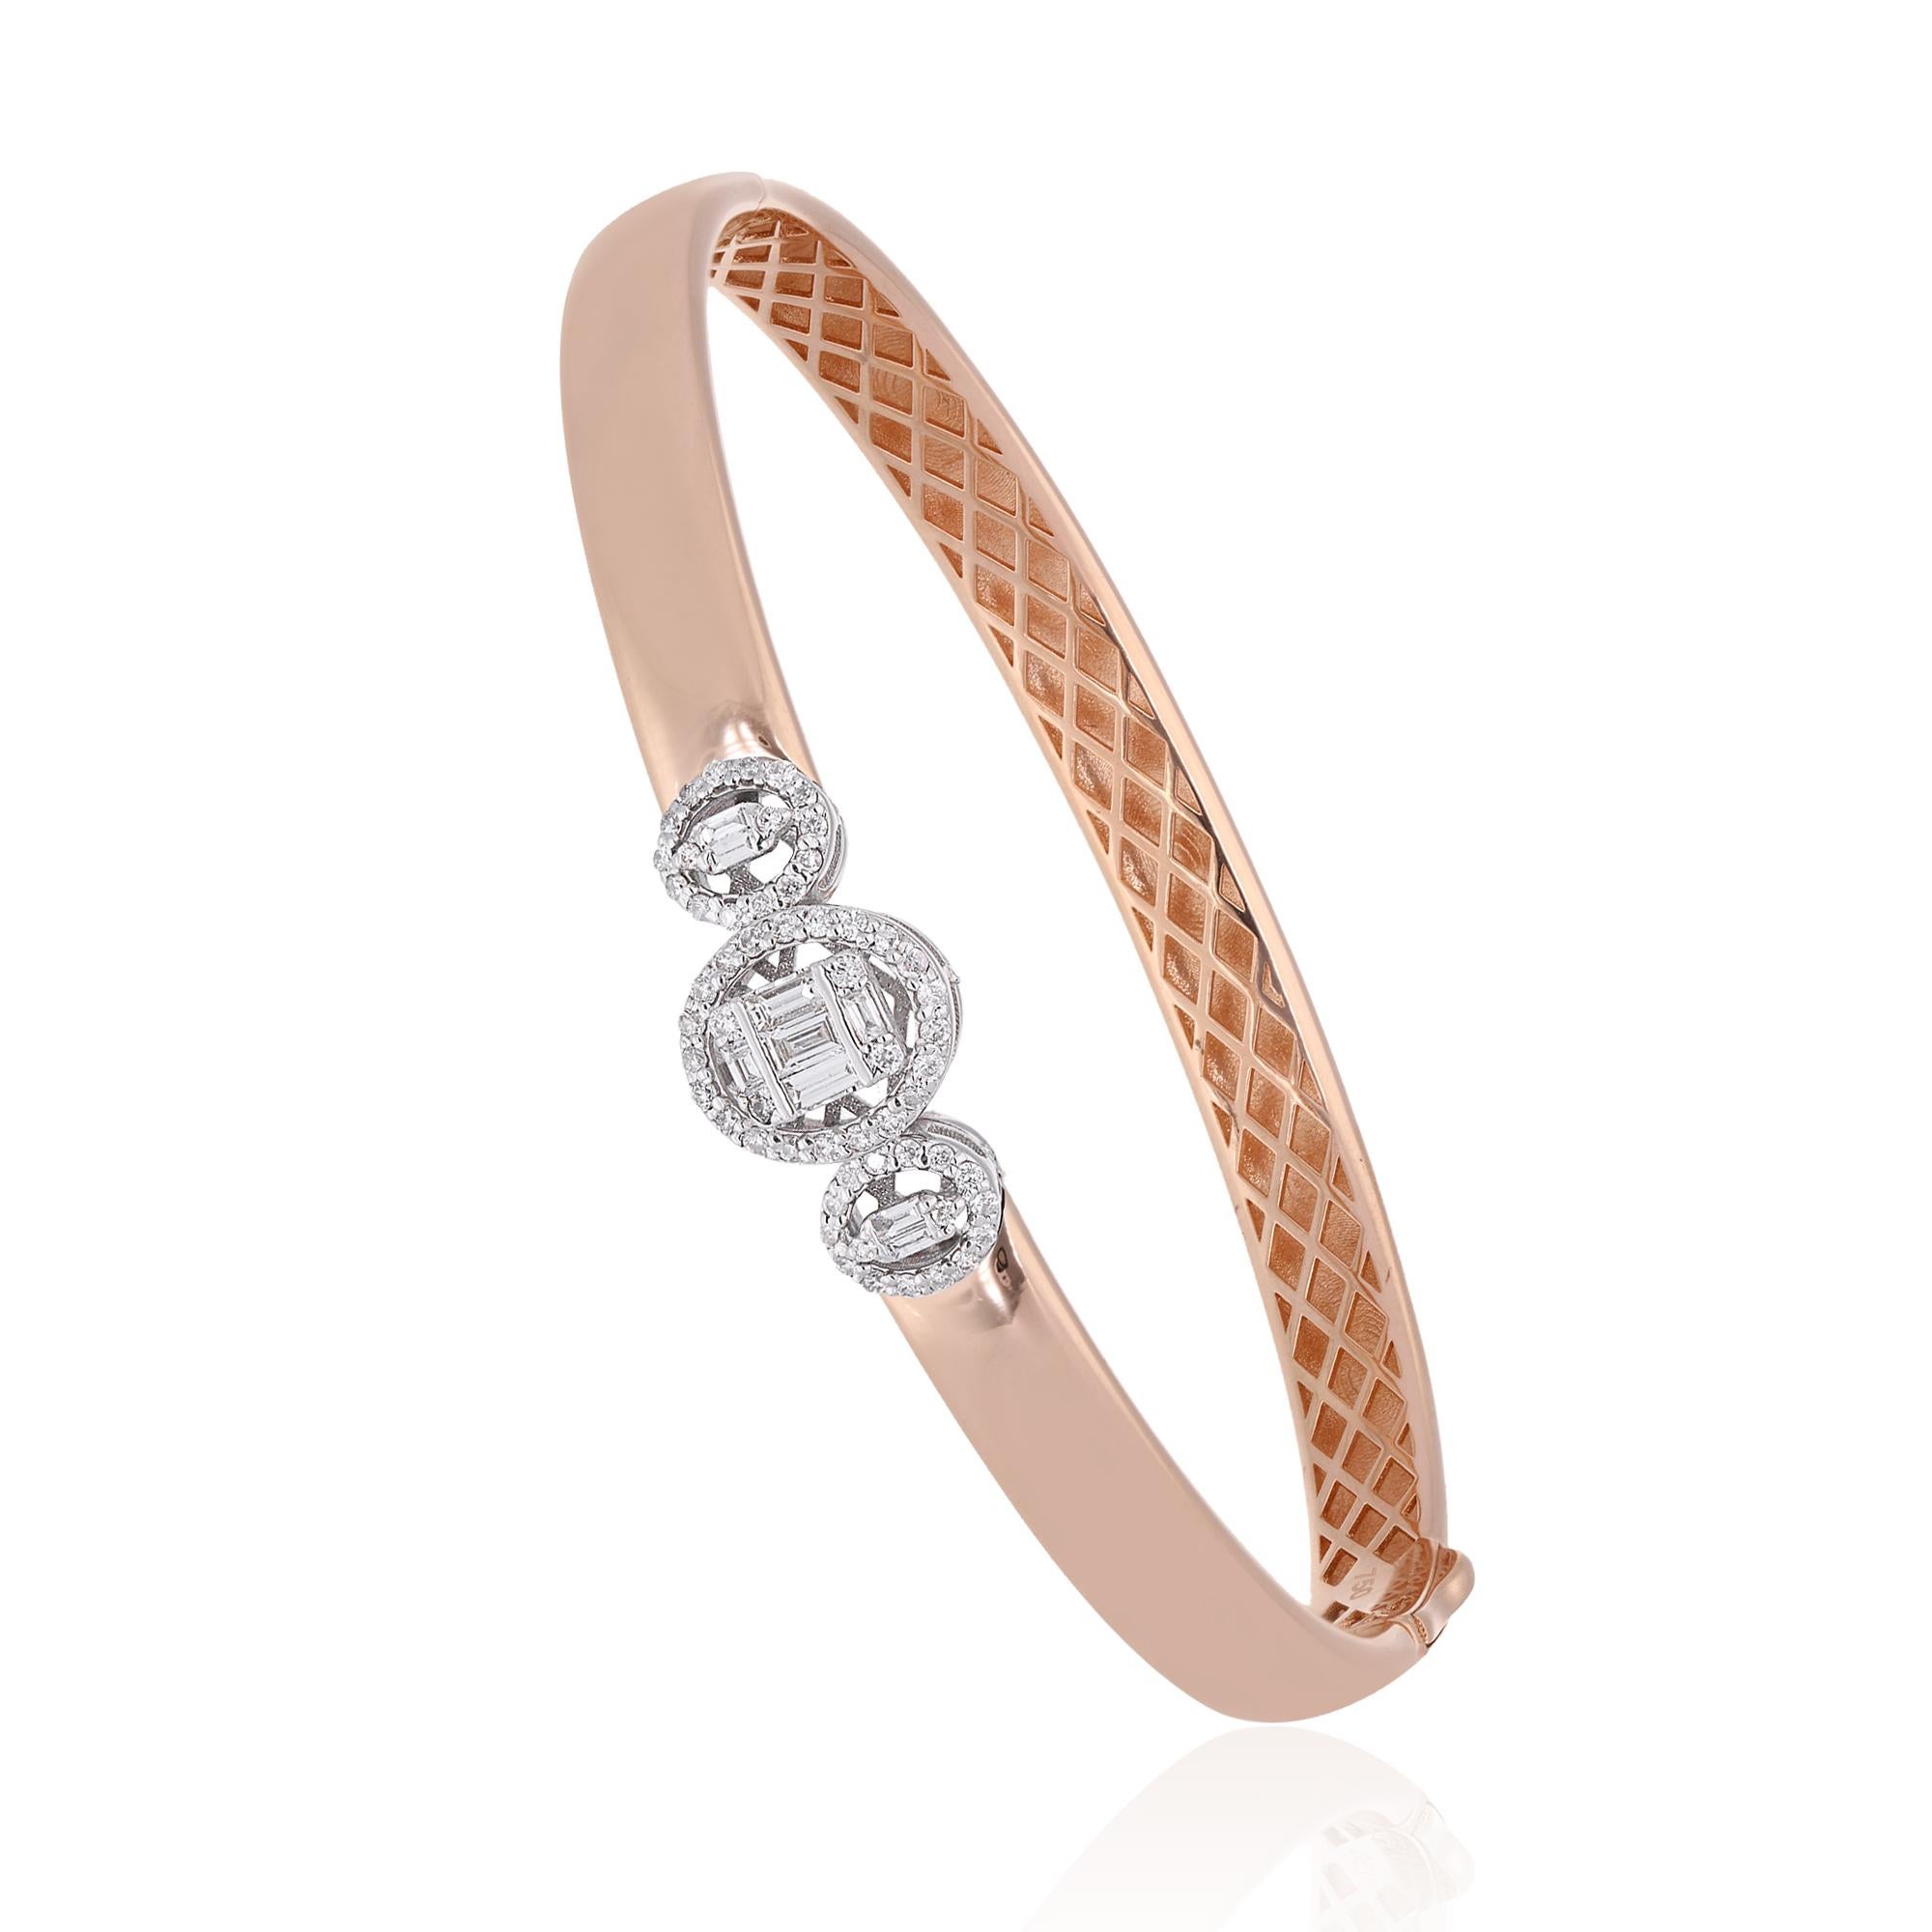 Simple and elegant, this 18k Rose Gold Diamond studded Bracelet will make your look fashionable and classy. Its classy shine and flawless finish enhances its majestic charm and makes it more adorable.

✧✧Welcome To Our Shop Spectrum